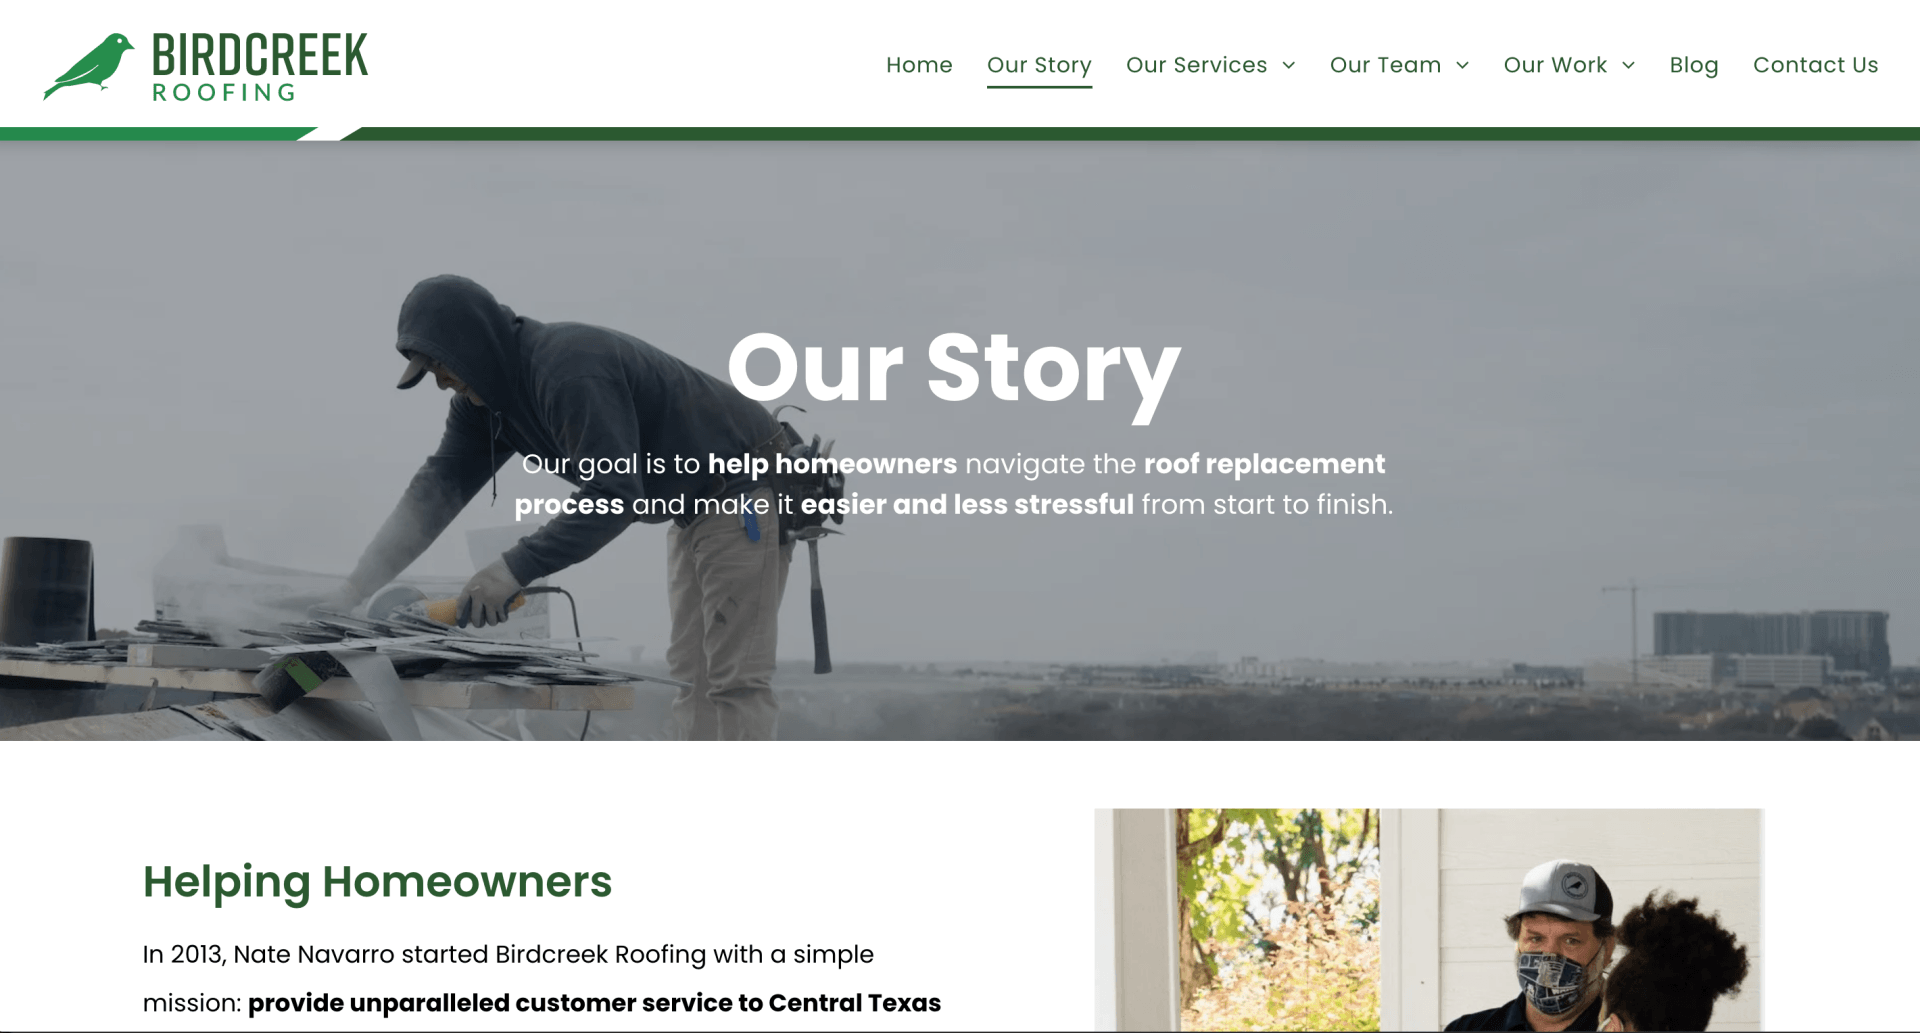 birdcreek roofer web design - our story page